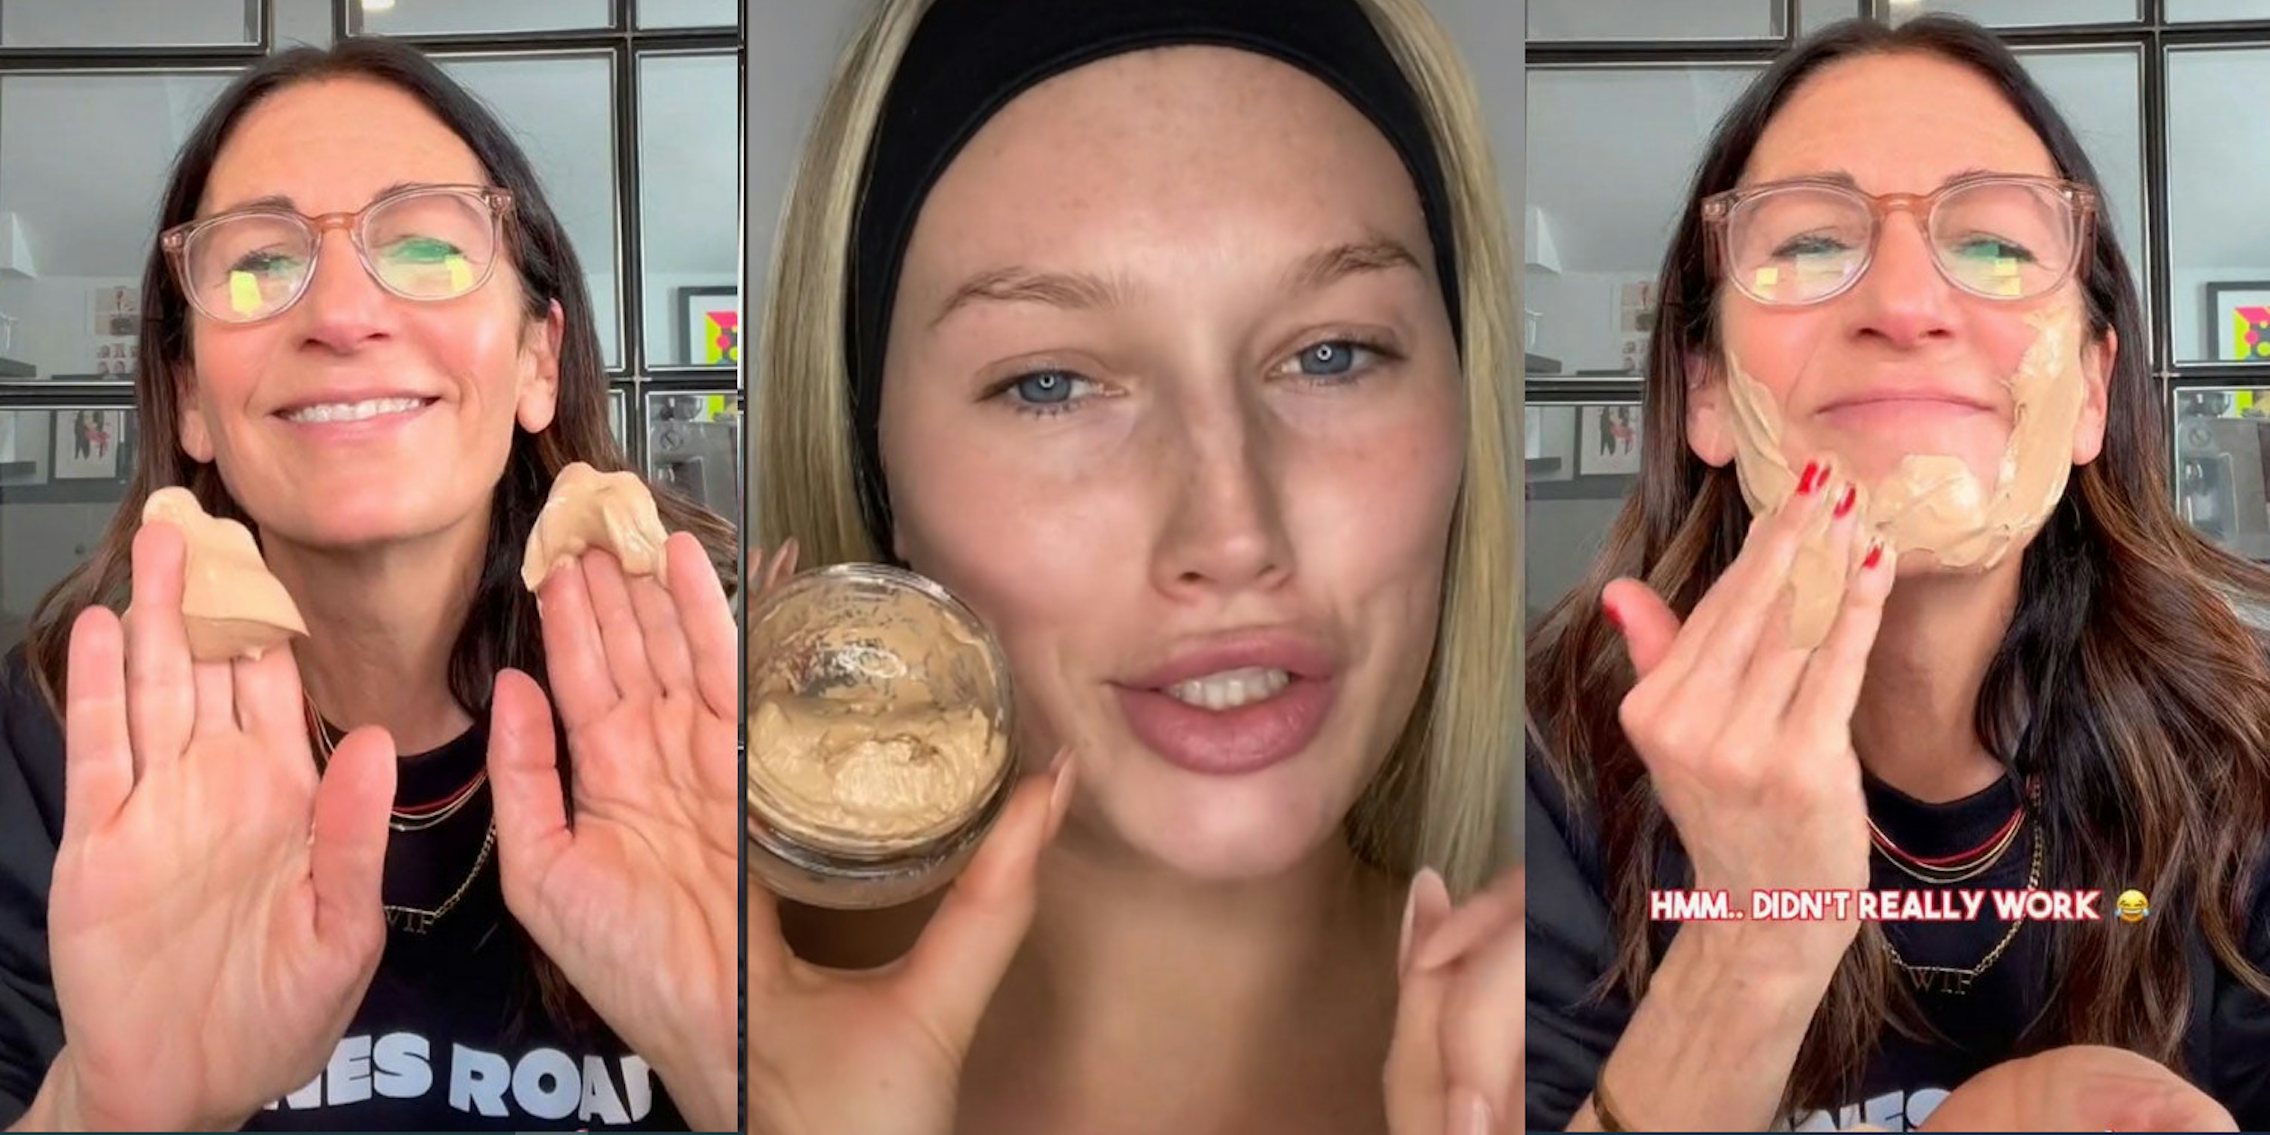 Bobbi Brown holding globs of foundation in both hands (l) Bobbi Brown hands together caption 'SO I ALWAYS LOVE LEARNING NEW MAKEUP TECHNIQUES' (c) Bobbi Brown hand on face applying foundation caption 'HMM..DIDN'T REALLY WORK laughing emoji*' (r)